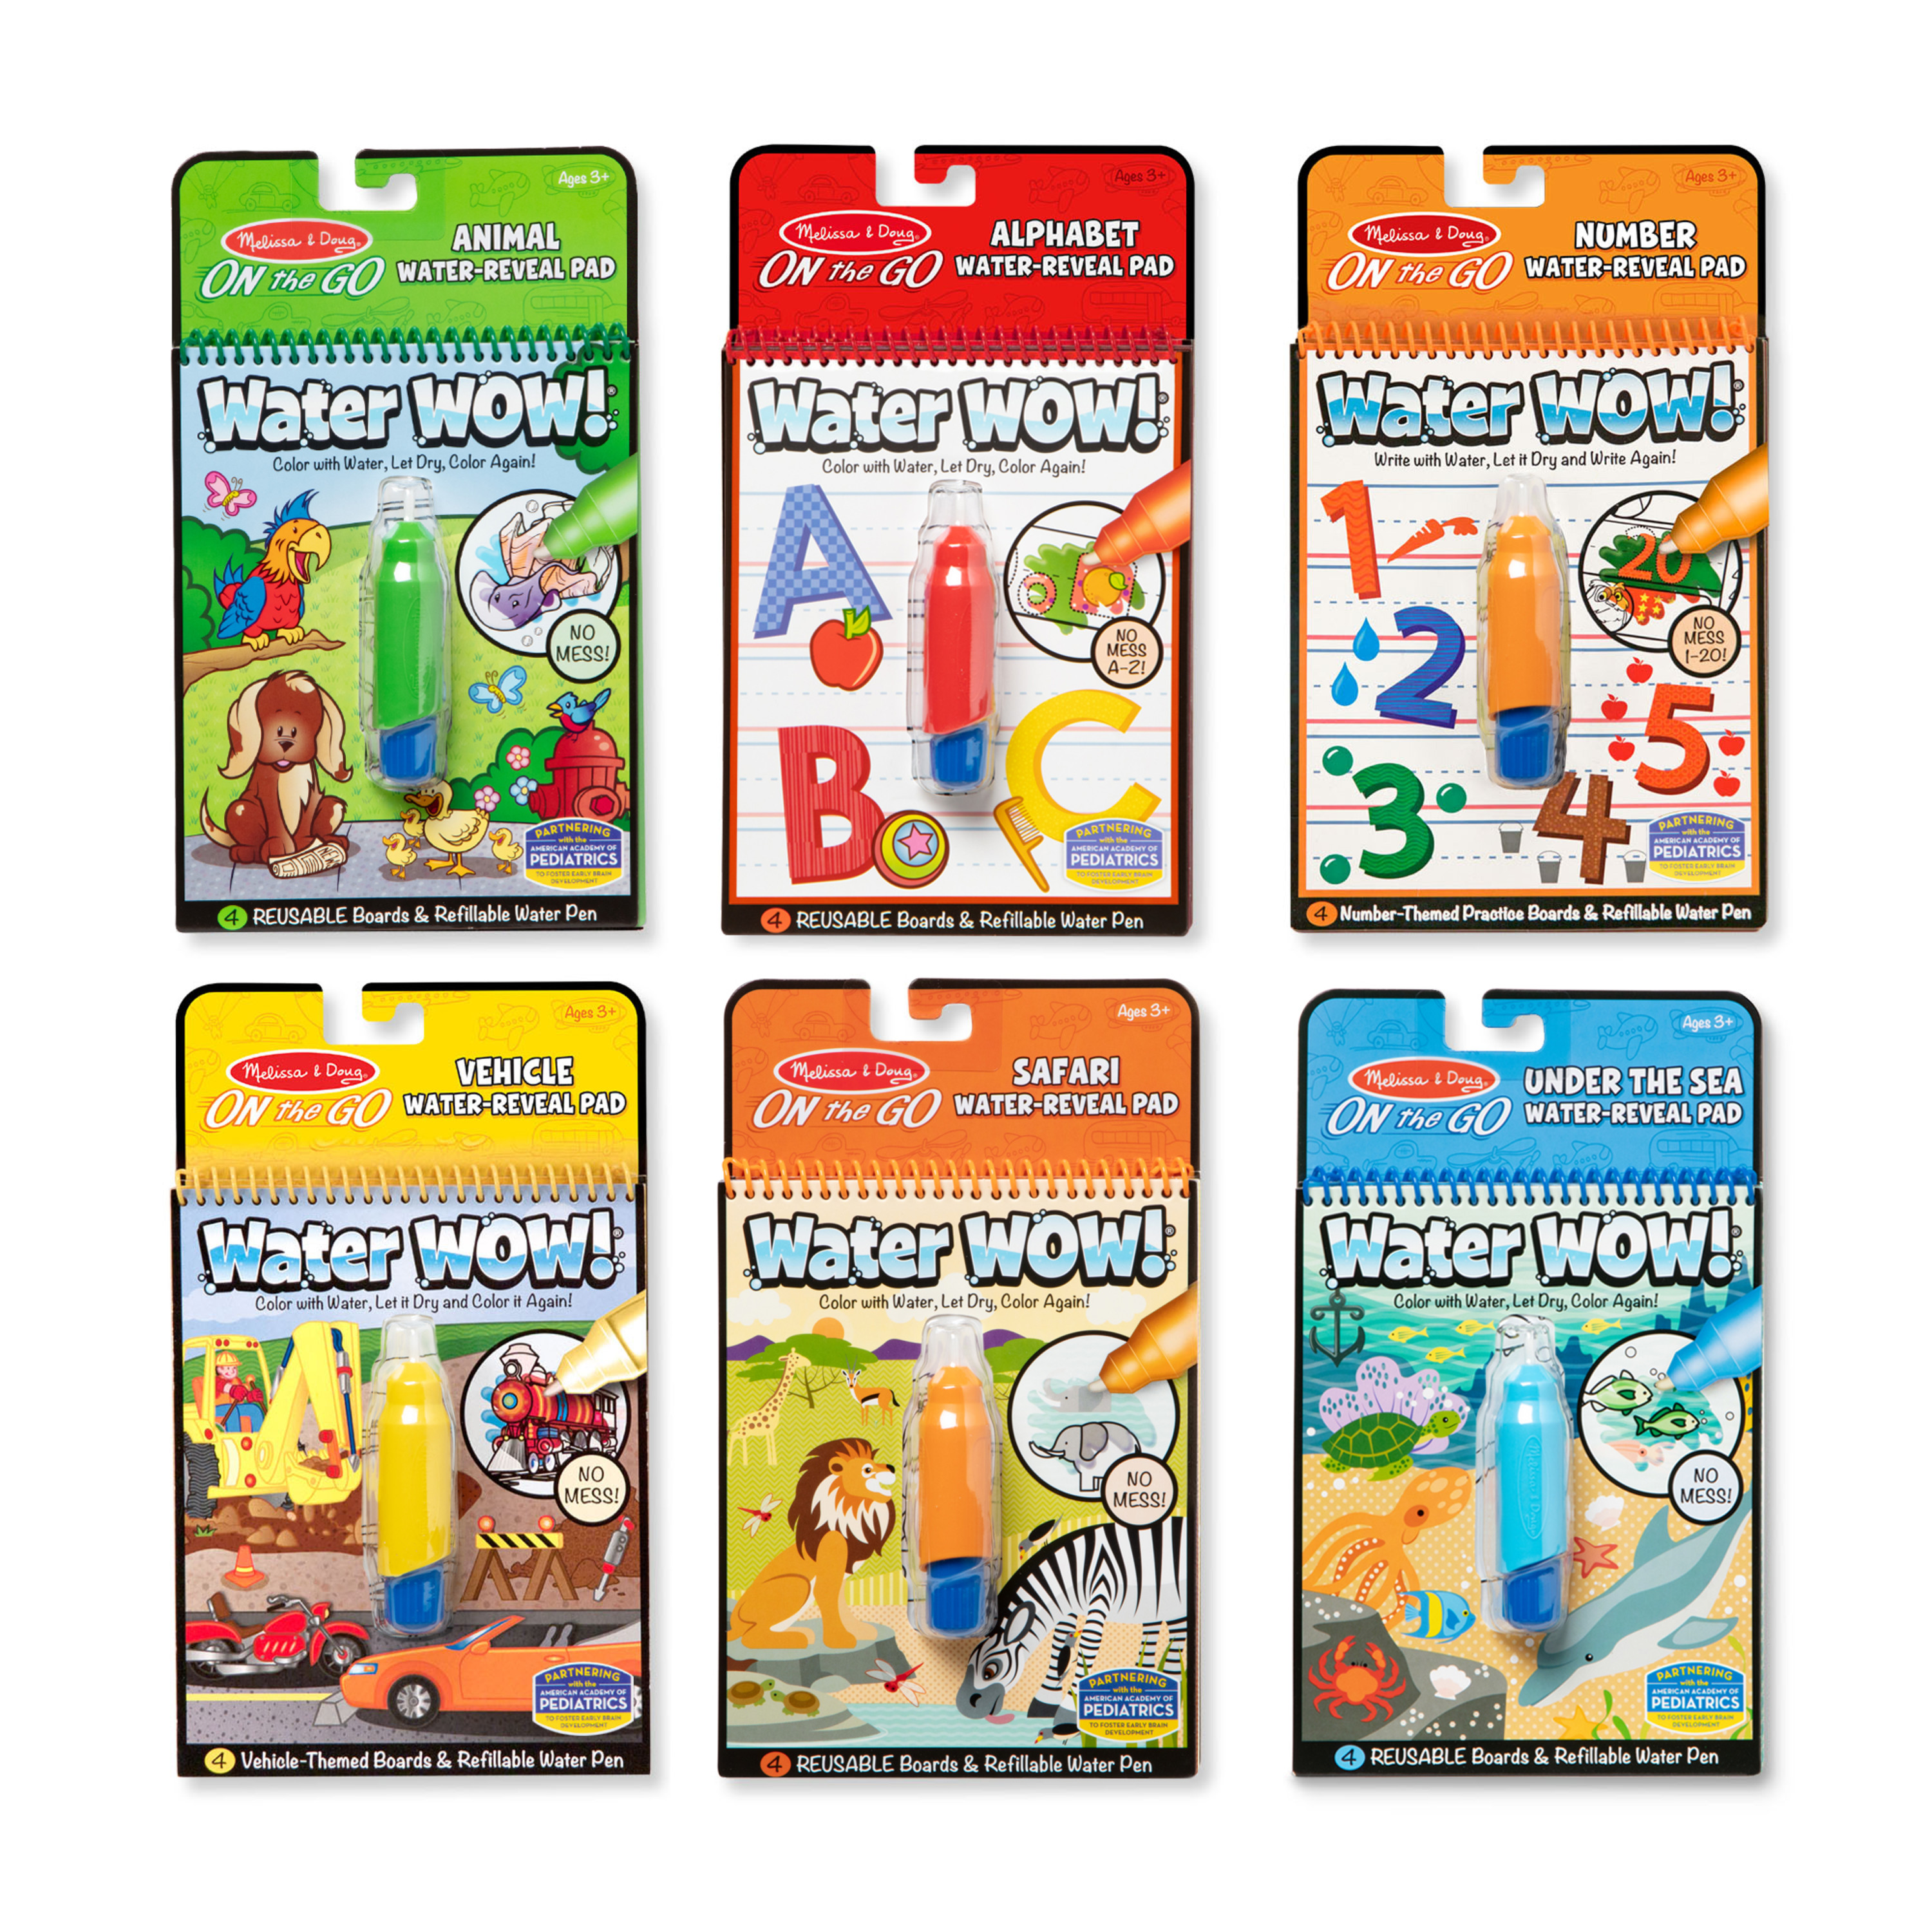 Melissa & Doug Water Wow! - Water Reveal Pad Bundle - Animals, Alphabet, Numbers and More - image 4 of 10